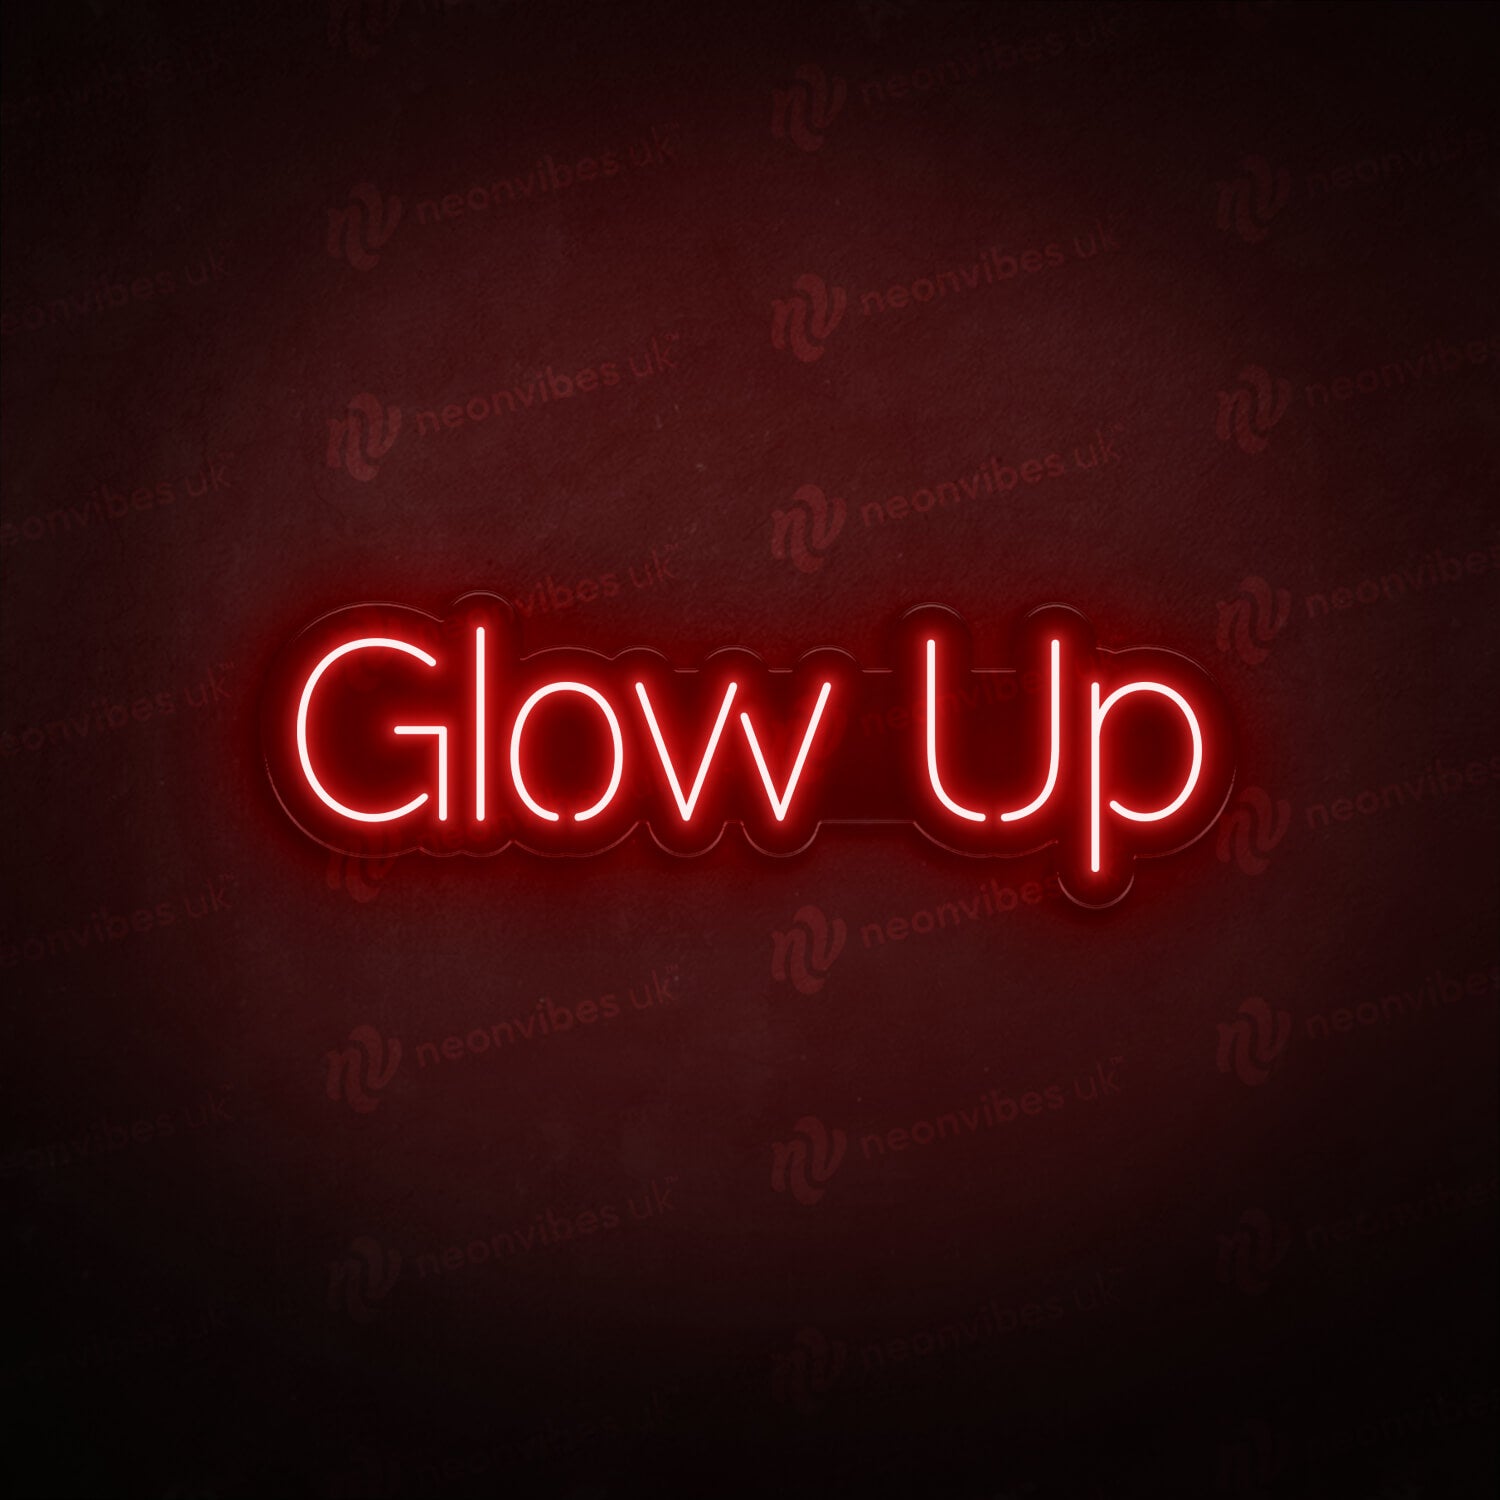 Glow Up neon sign